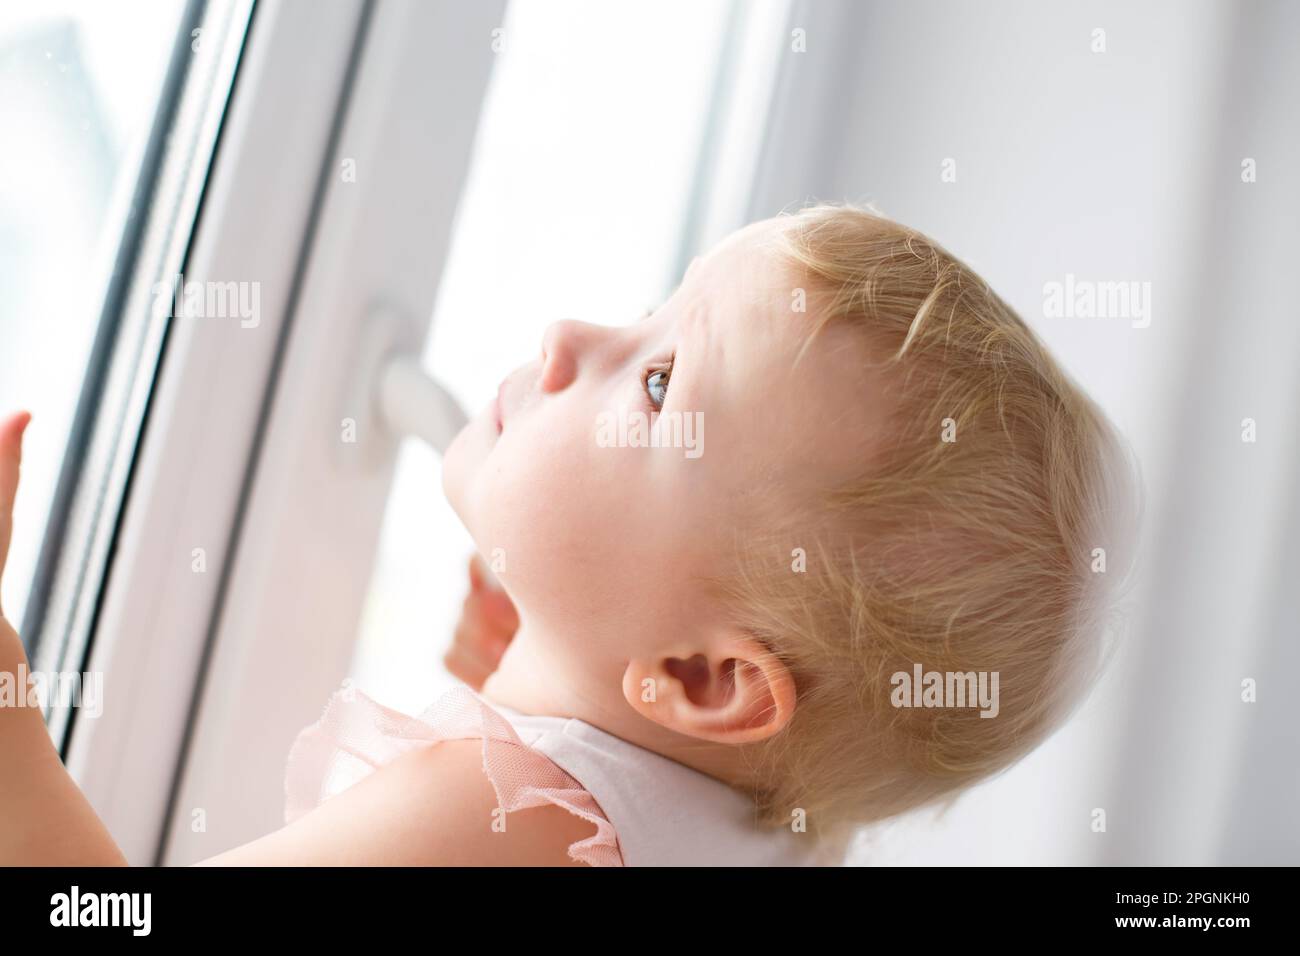 Protecting children from falling out of windows. An active little girl carefully opens a metal-plastic window in the house. Stock Photo